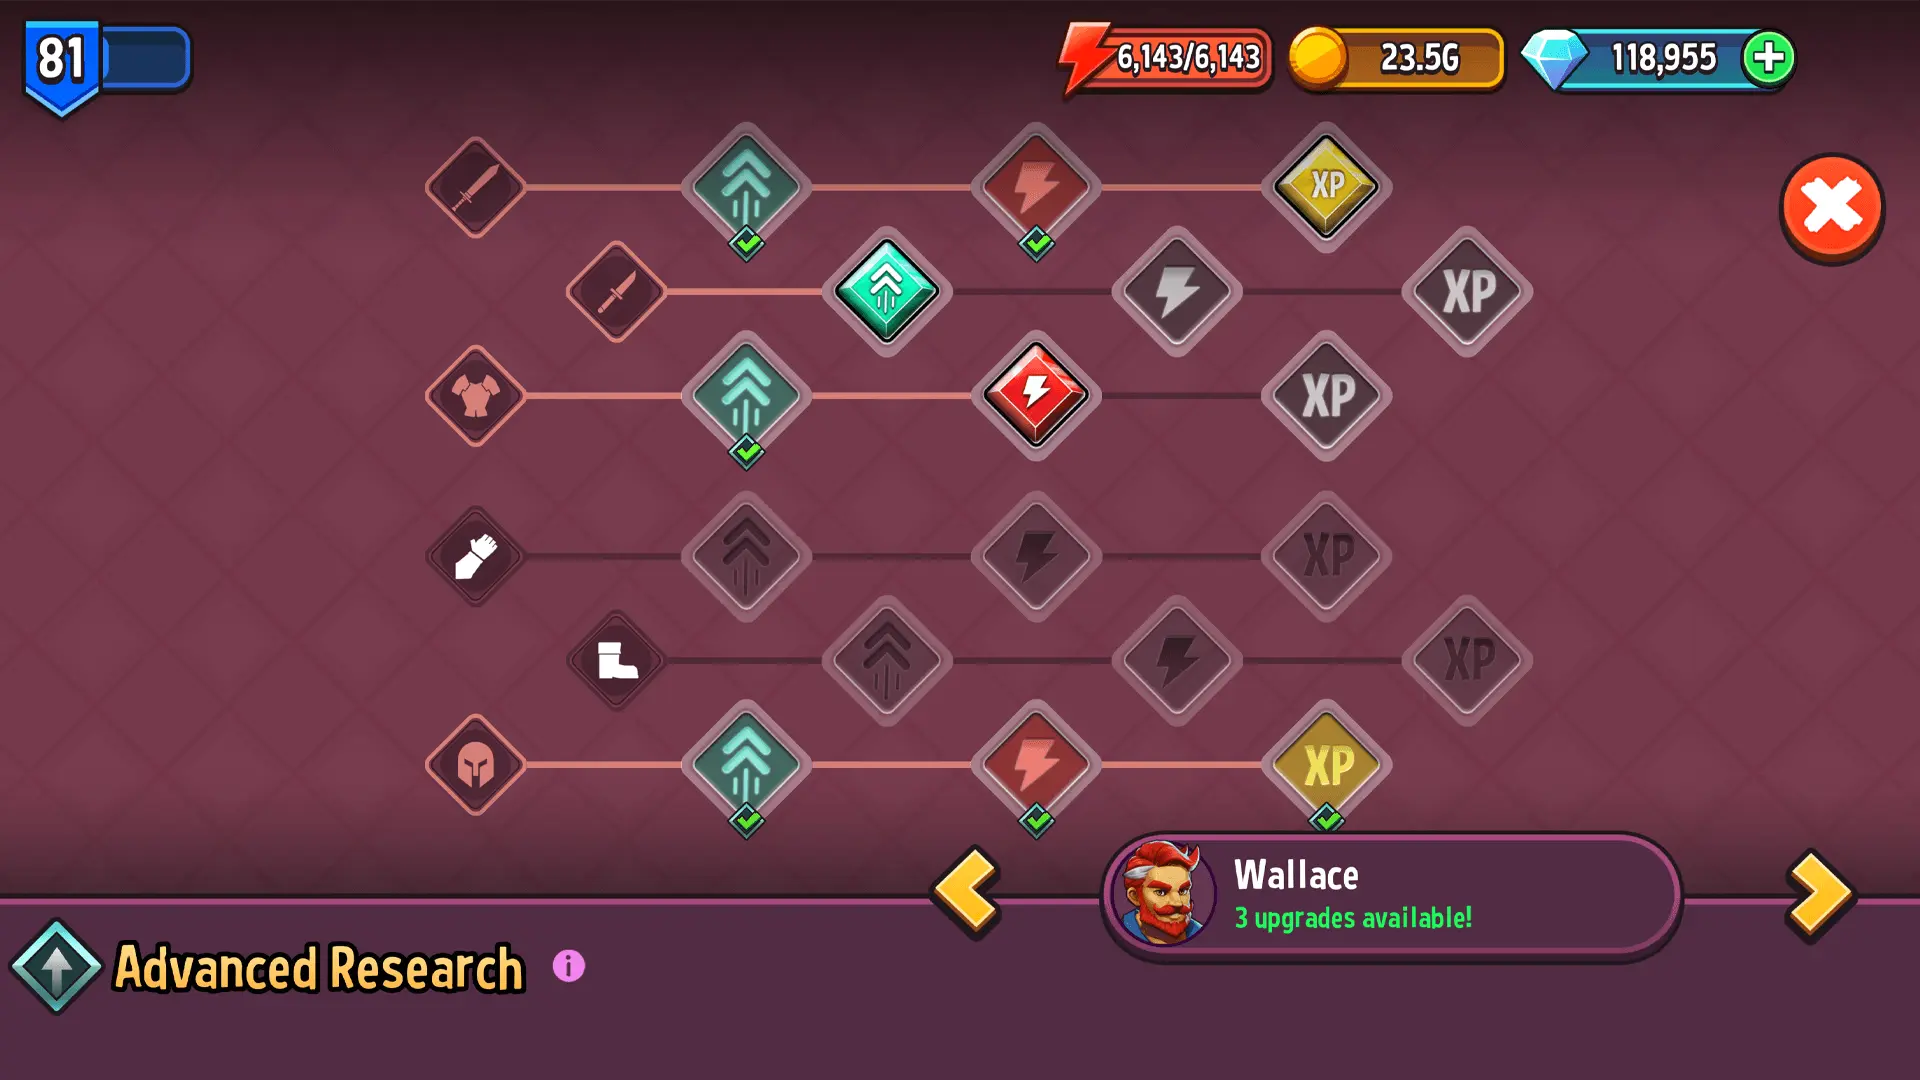 A preview of the Advanced Research menu.